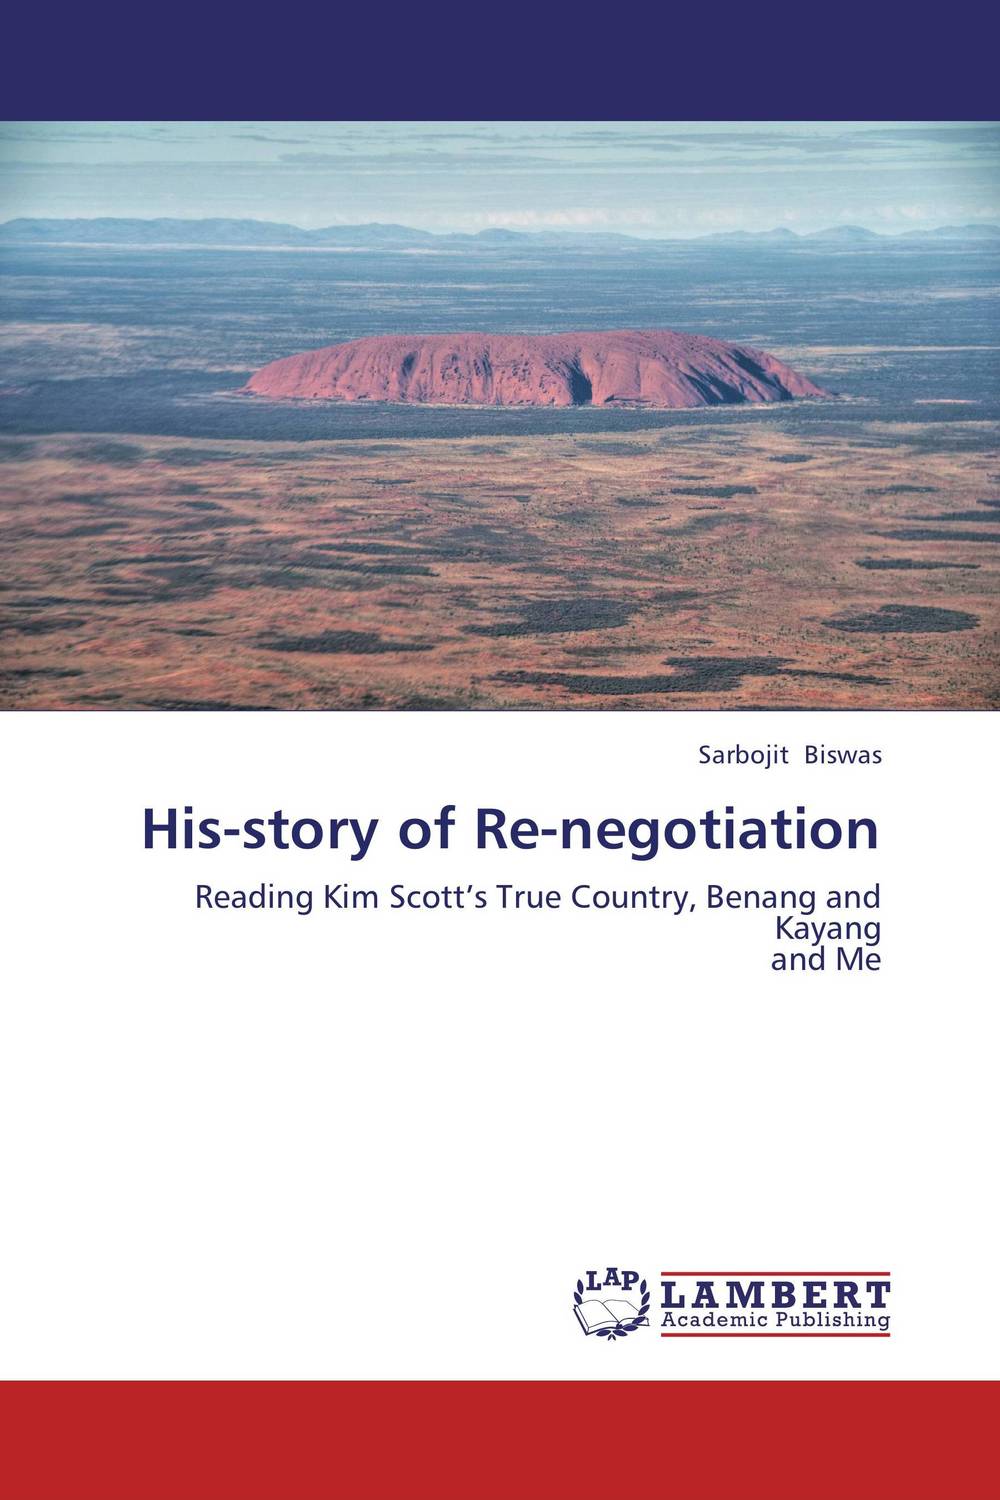 His-story of Re-negotiation